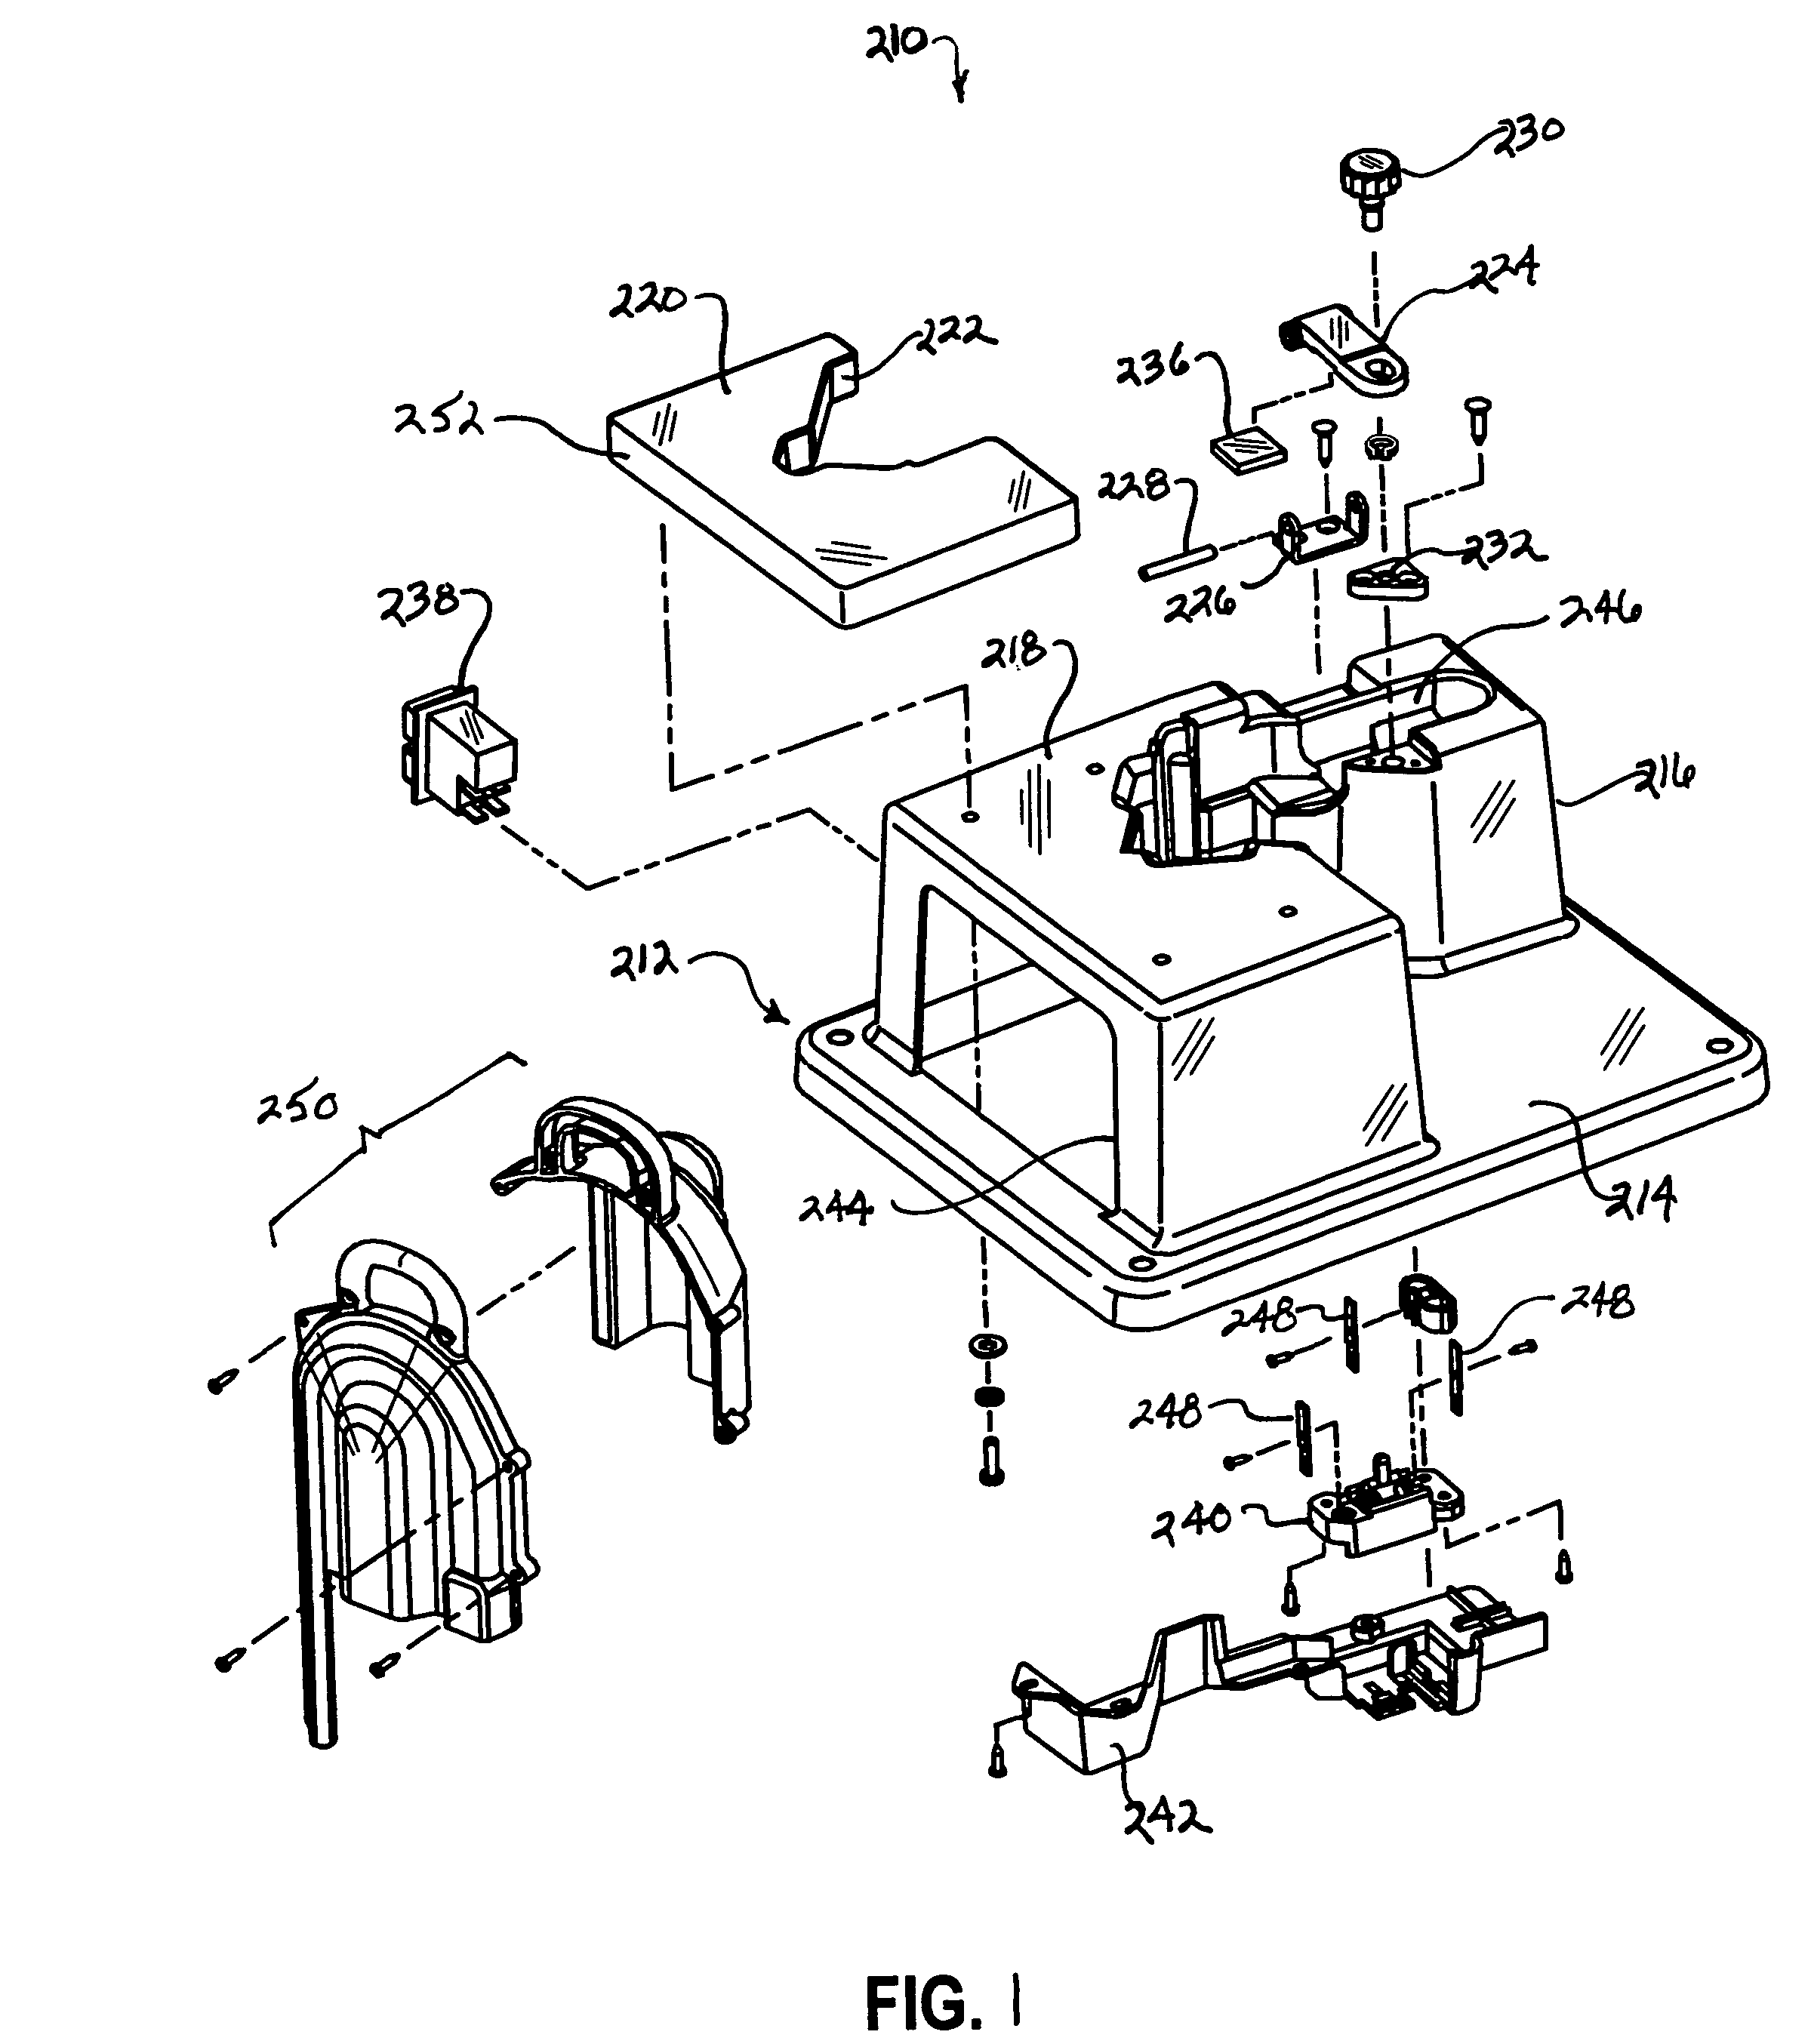 Stand for supporting a hand-held powered operated band saw